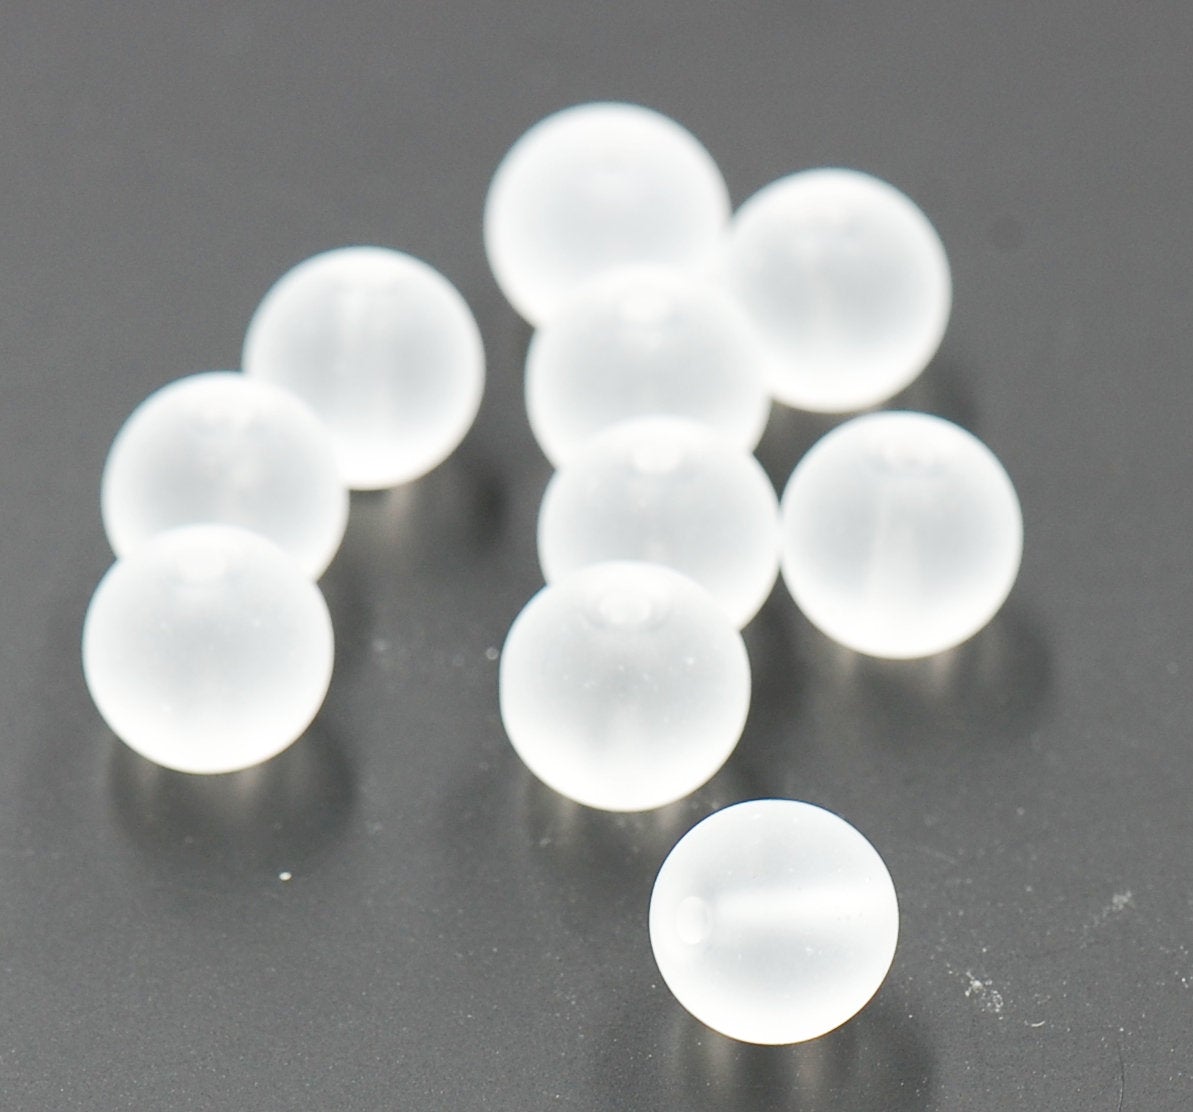 White 6mm Frosted Matte Glass Round Druk Beads - 100 beads